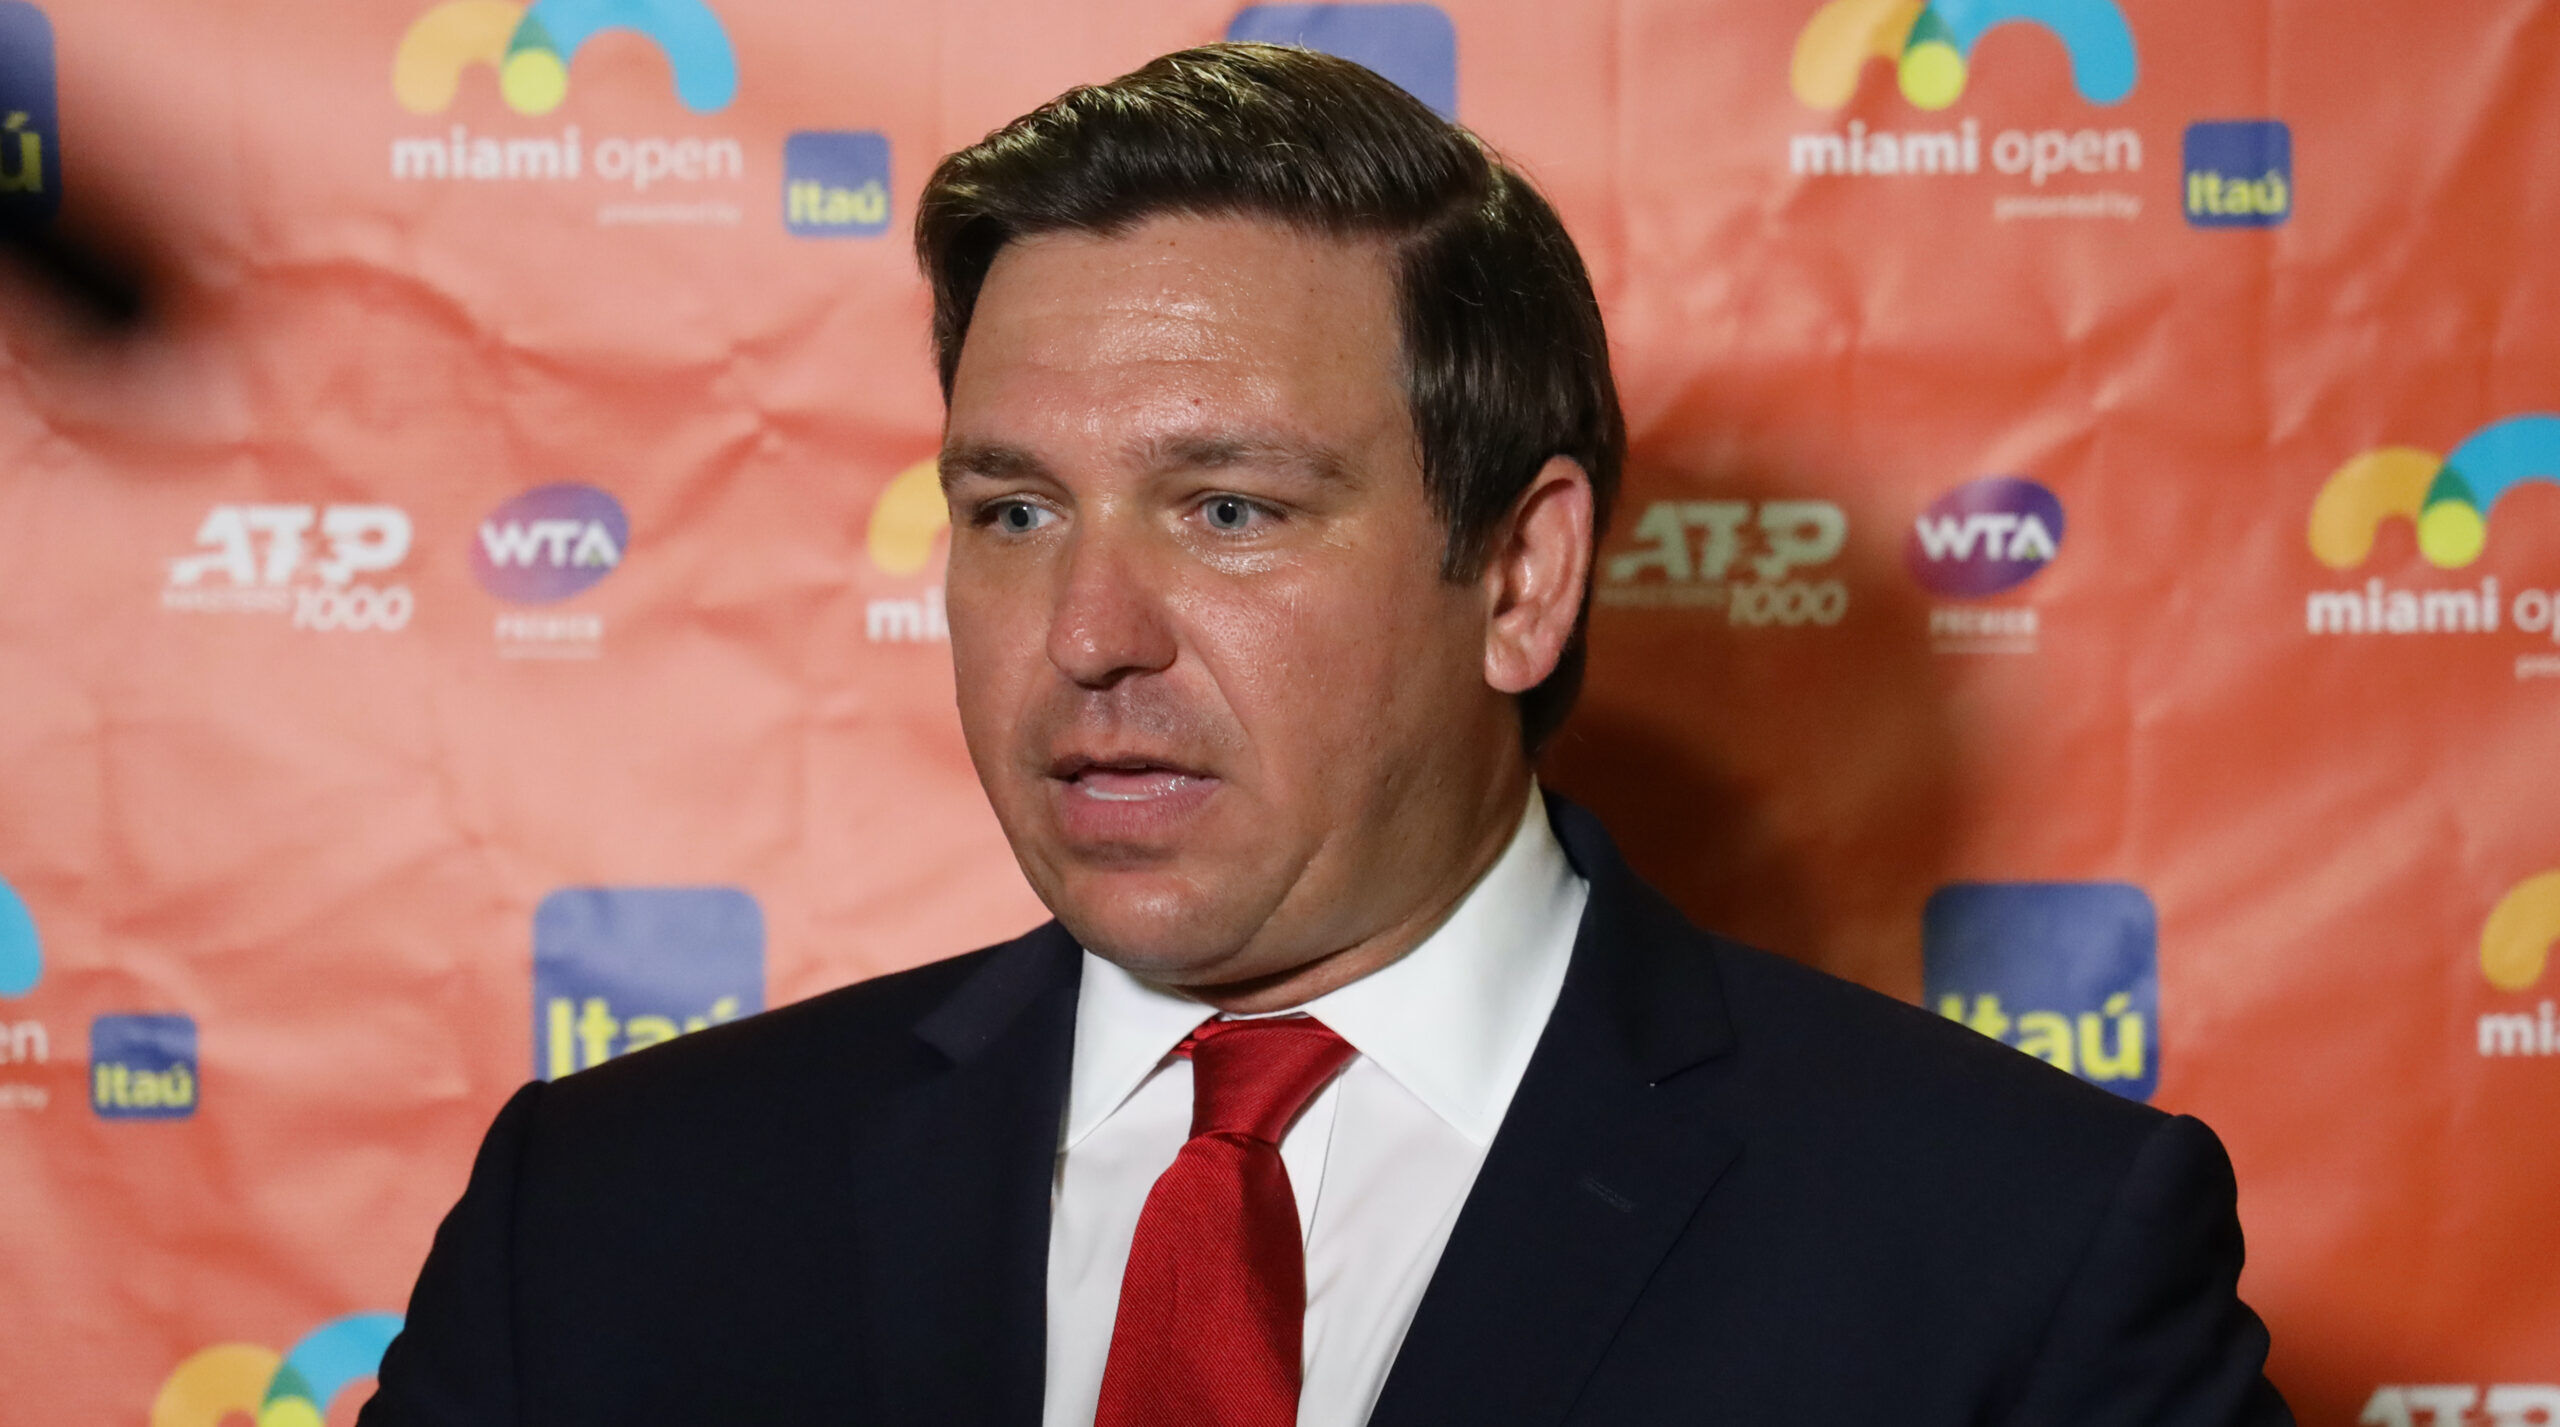 Ron DeSantis wearing a suit and red tie.